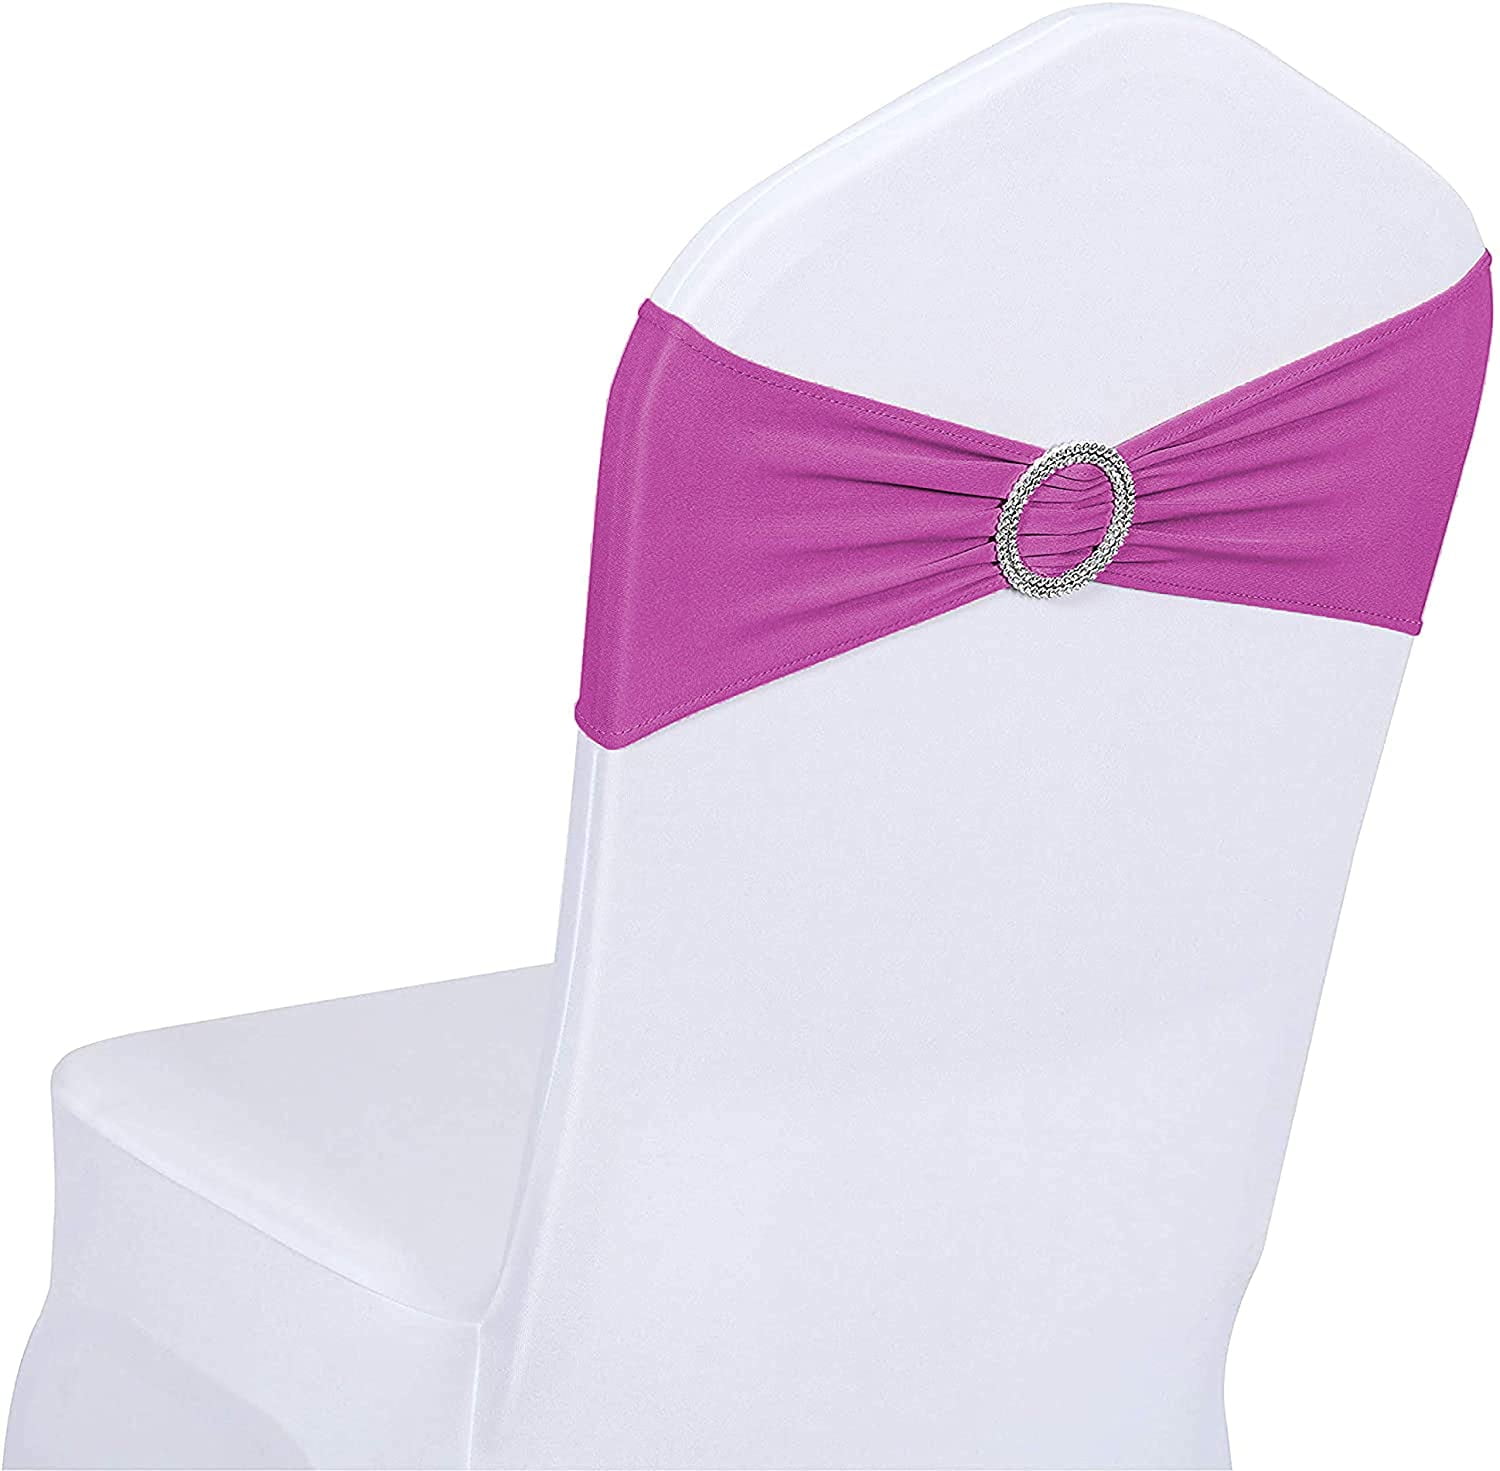 Spandex Stretch Tie Chair Sash Wedding Party Cover Band Buckle Bow Slider L 